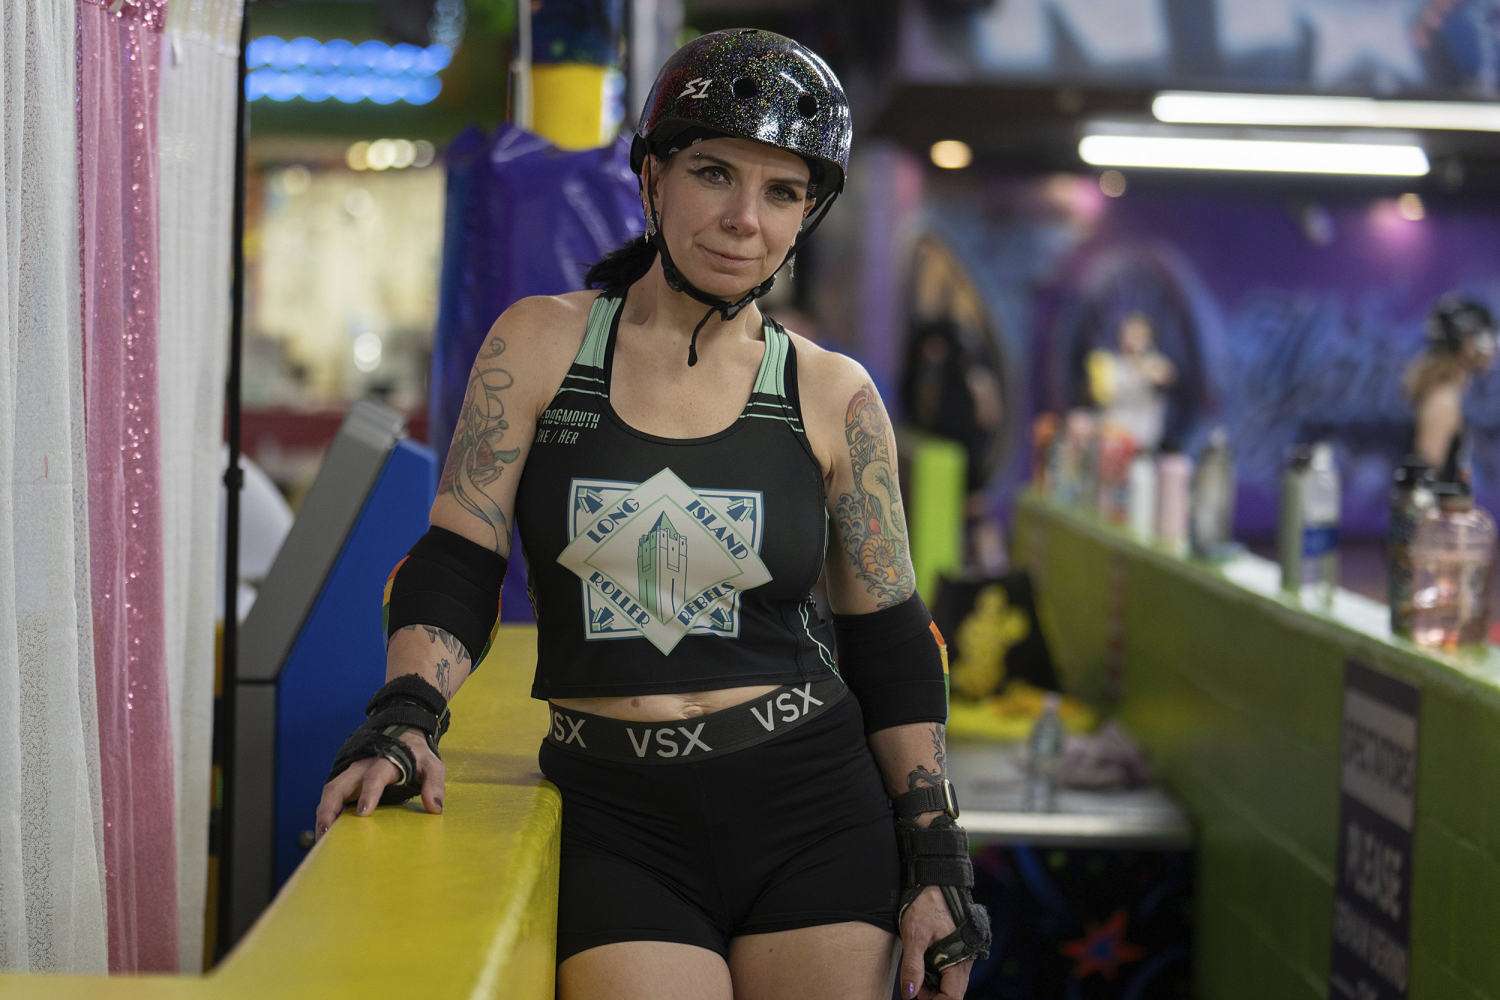 After a county restricted trans women in sports, a roller derby league said, 'No way'